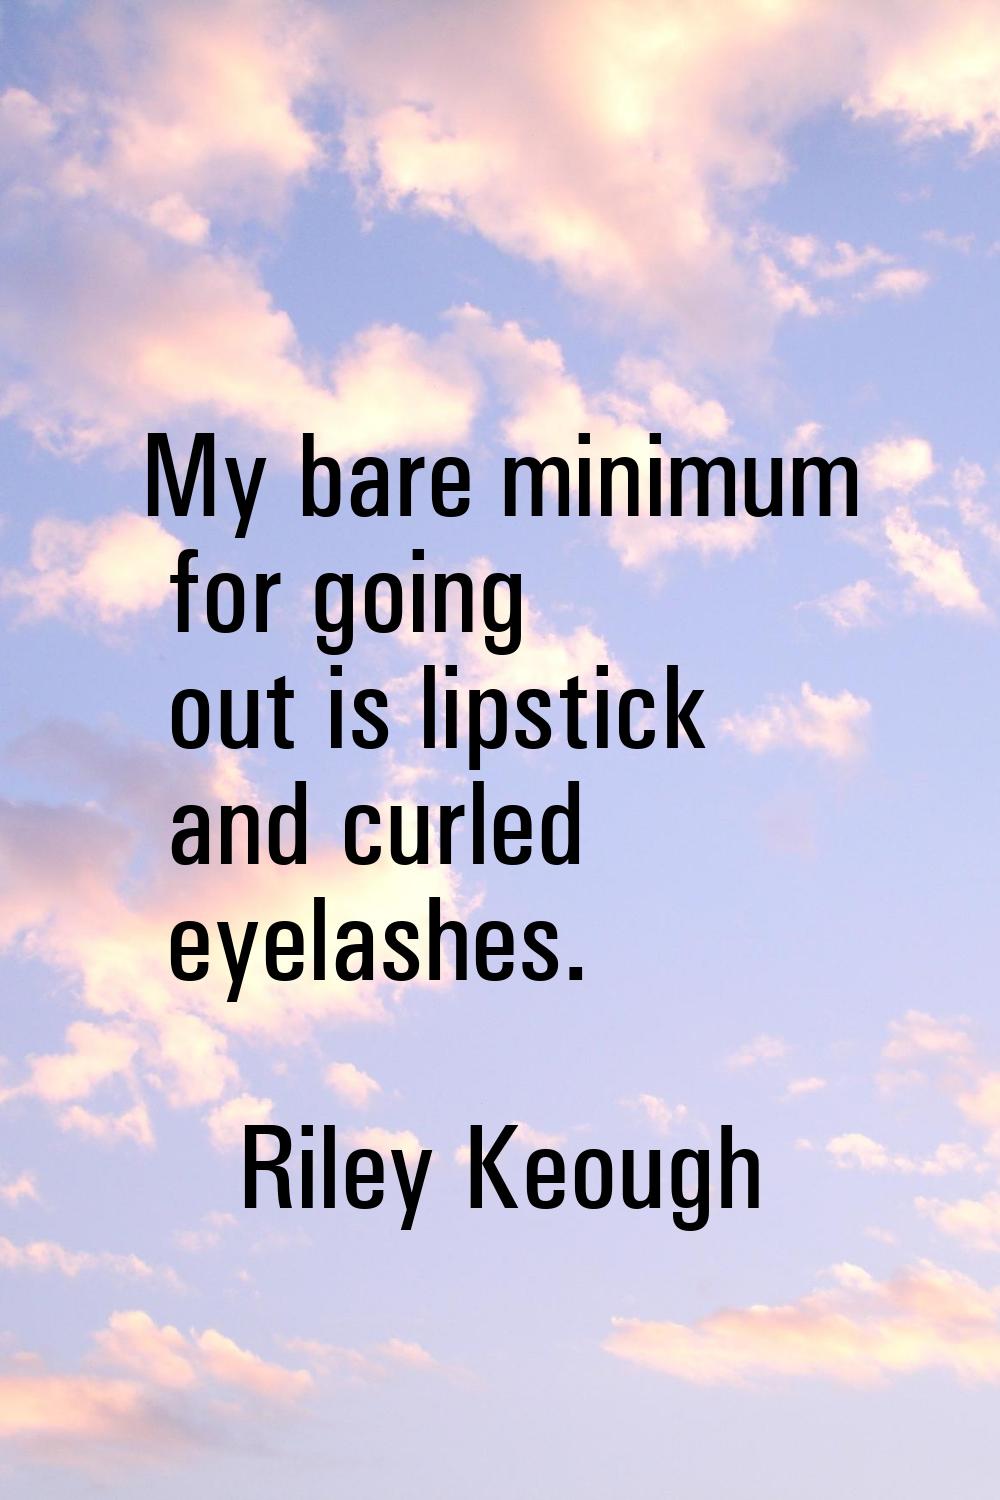 My bare minimum for going out is lipstick and curled eyelashes.